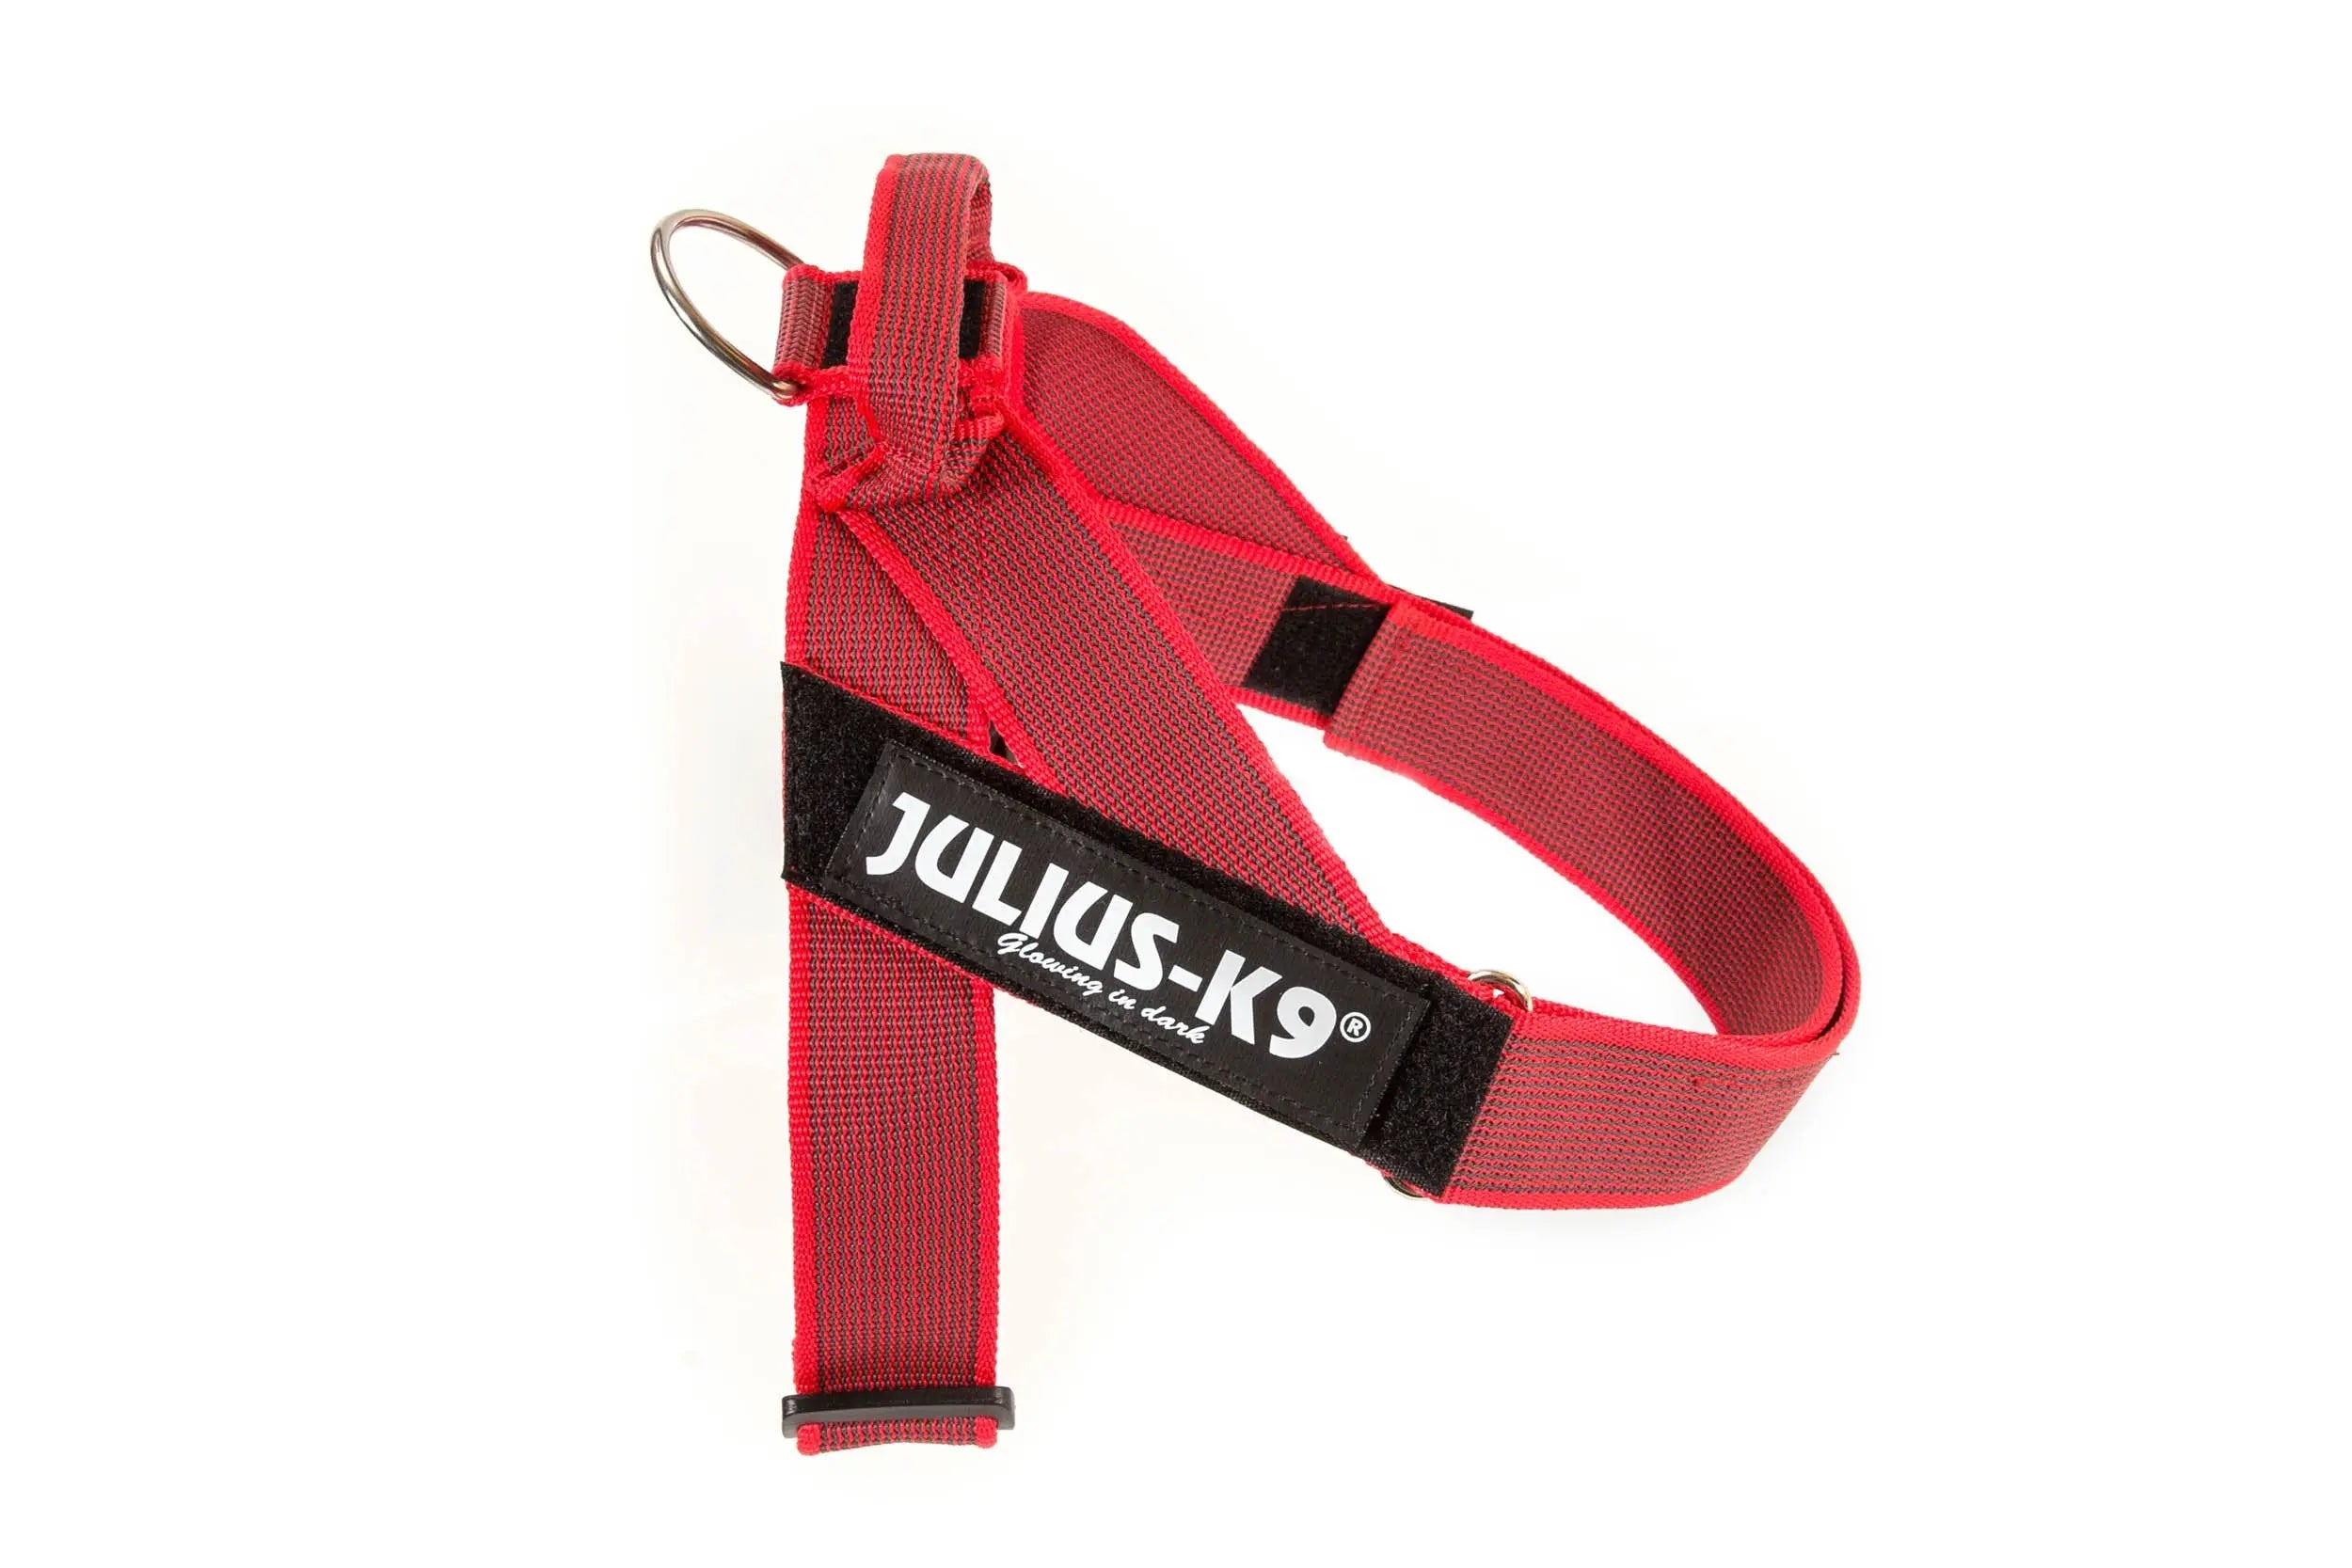 Julius-K9 IDC Color & Gray Belt Harness for Dogs, Size 2, Pink-Gray